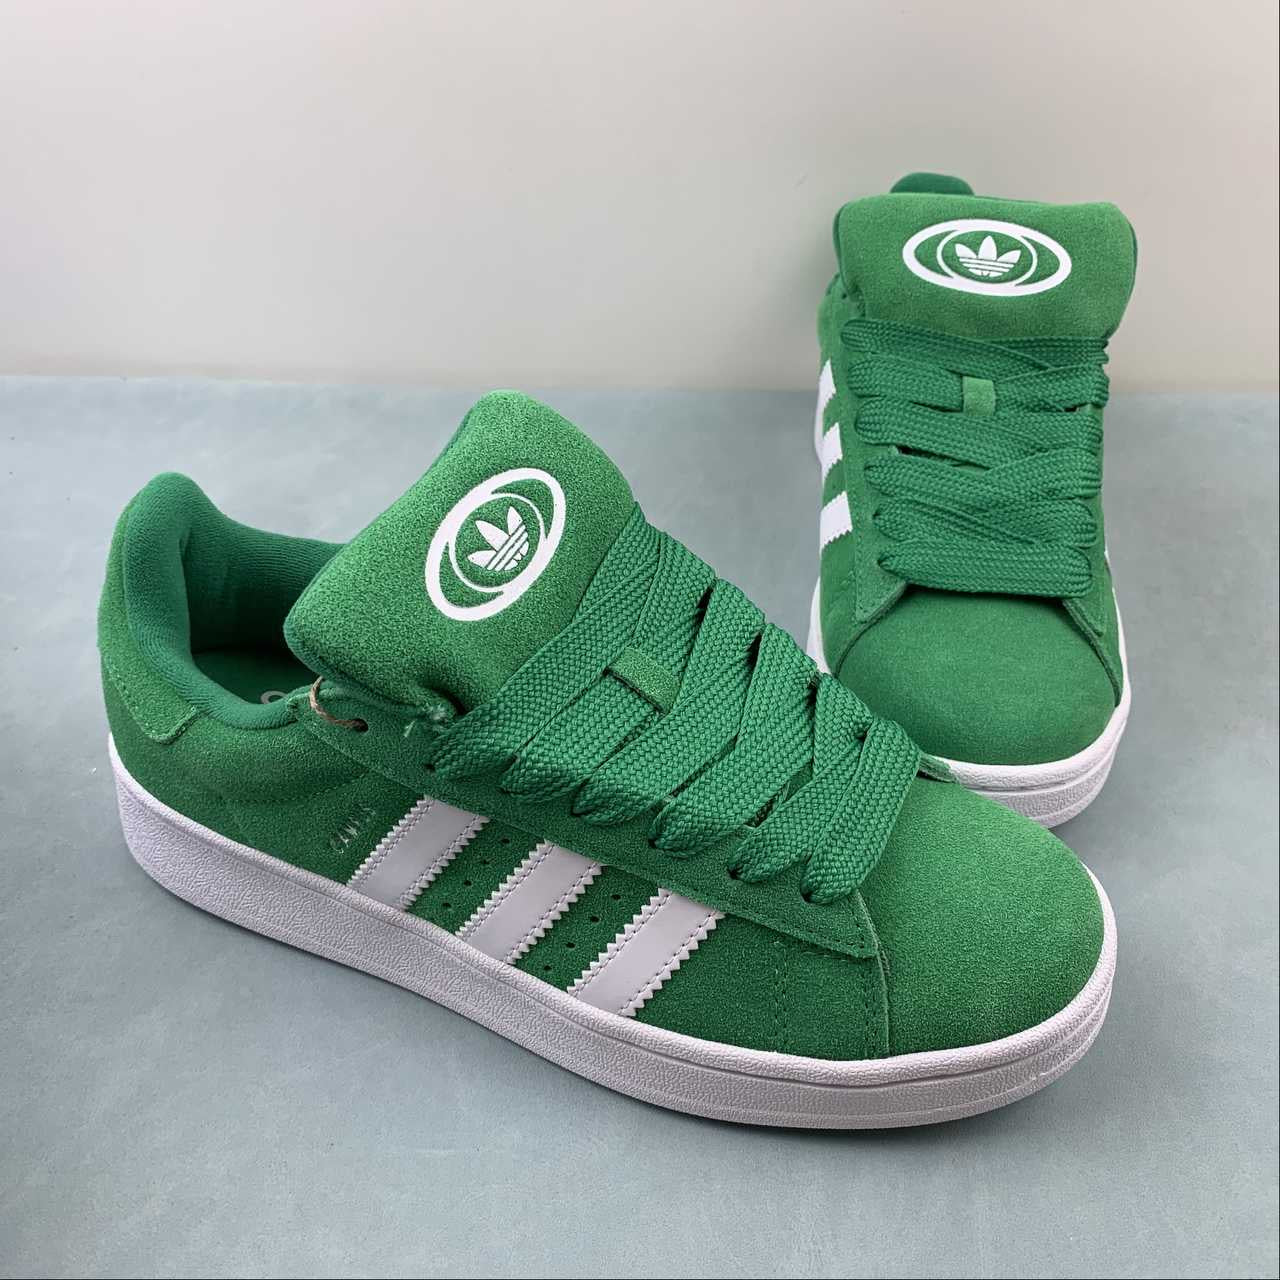 Adidas campus green shoes